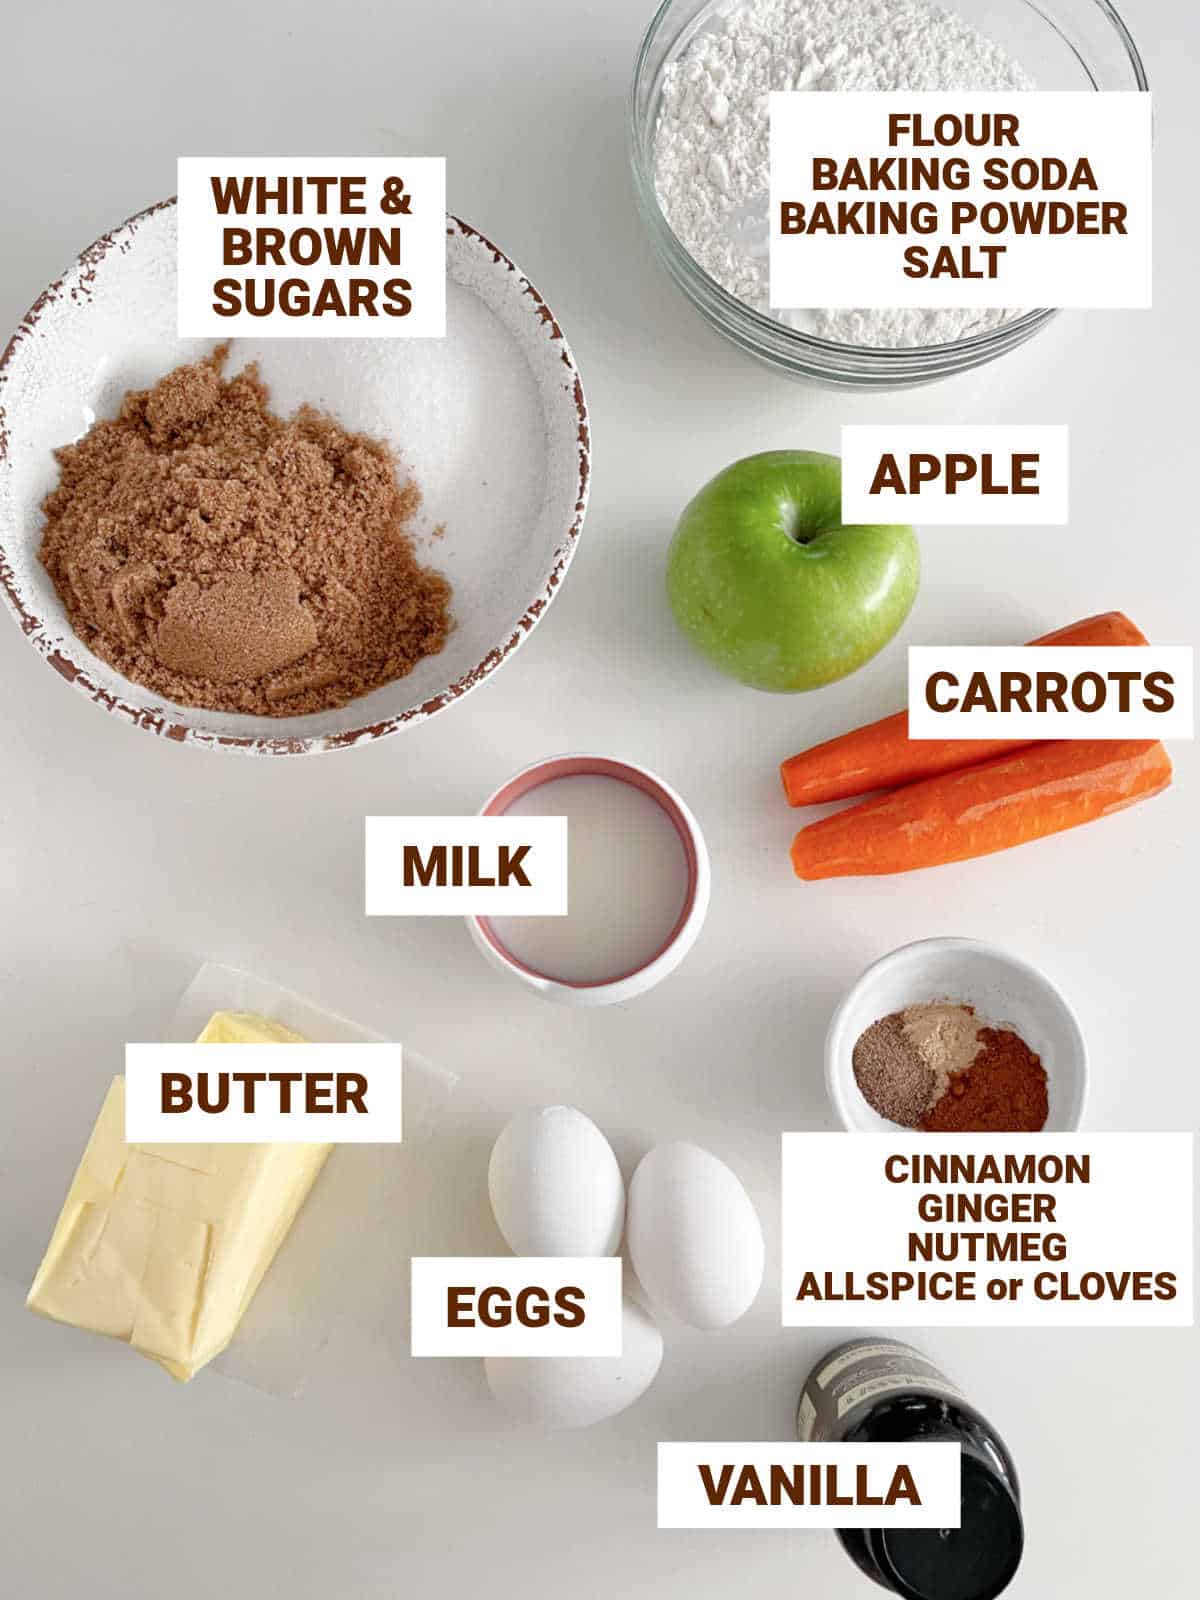 Carrot cake ingredients on white surface, including apple, sugar, butter, vanilla, spices, milk; text overlay.